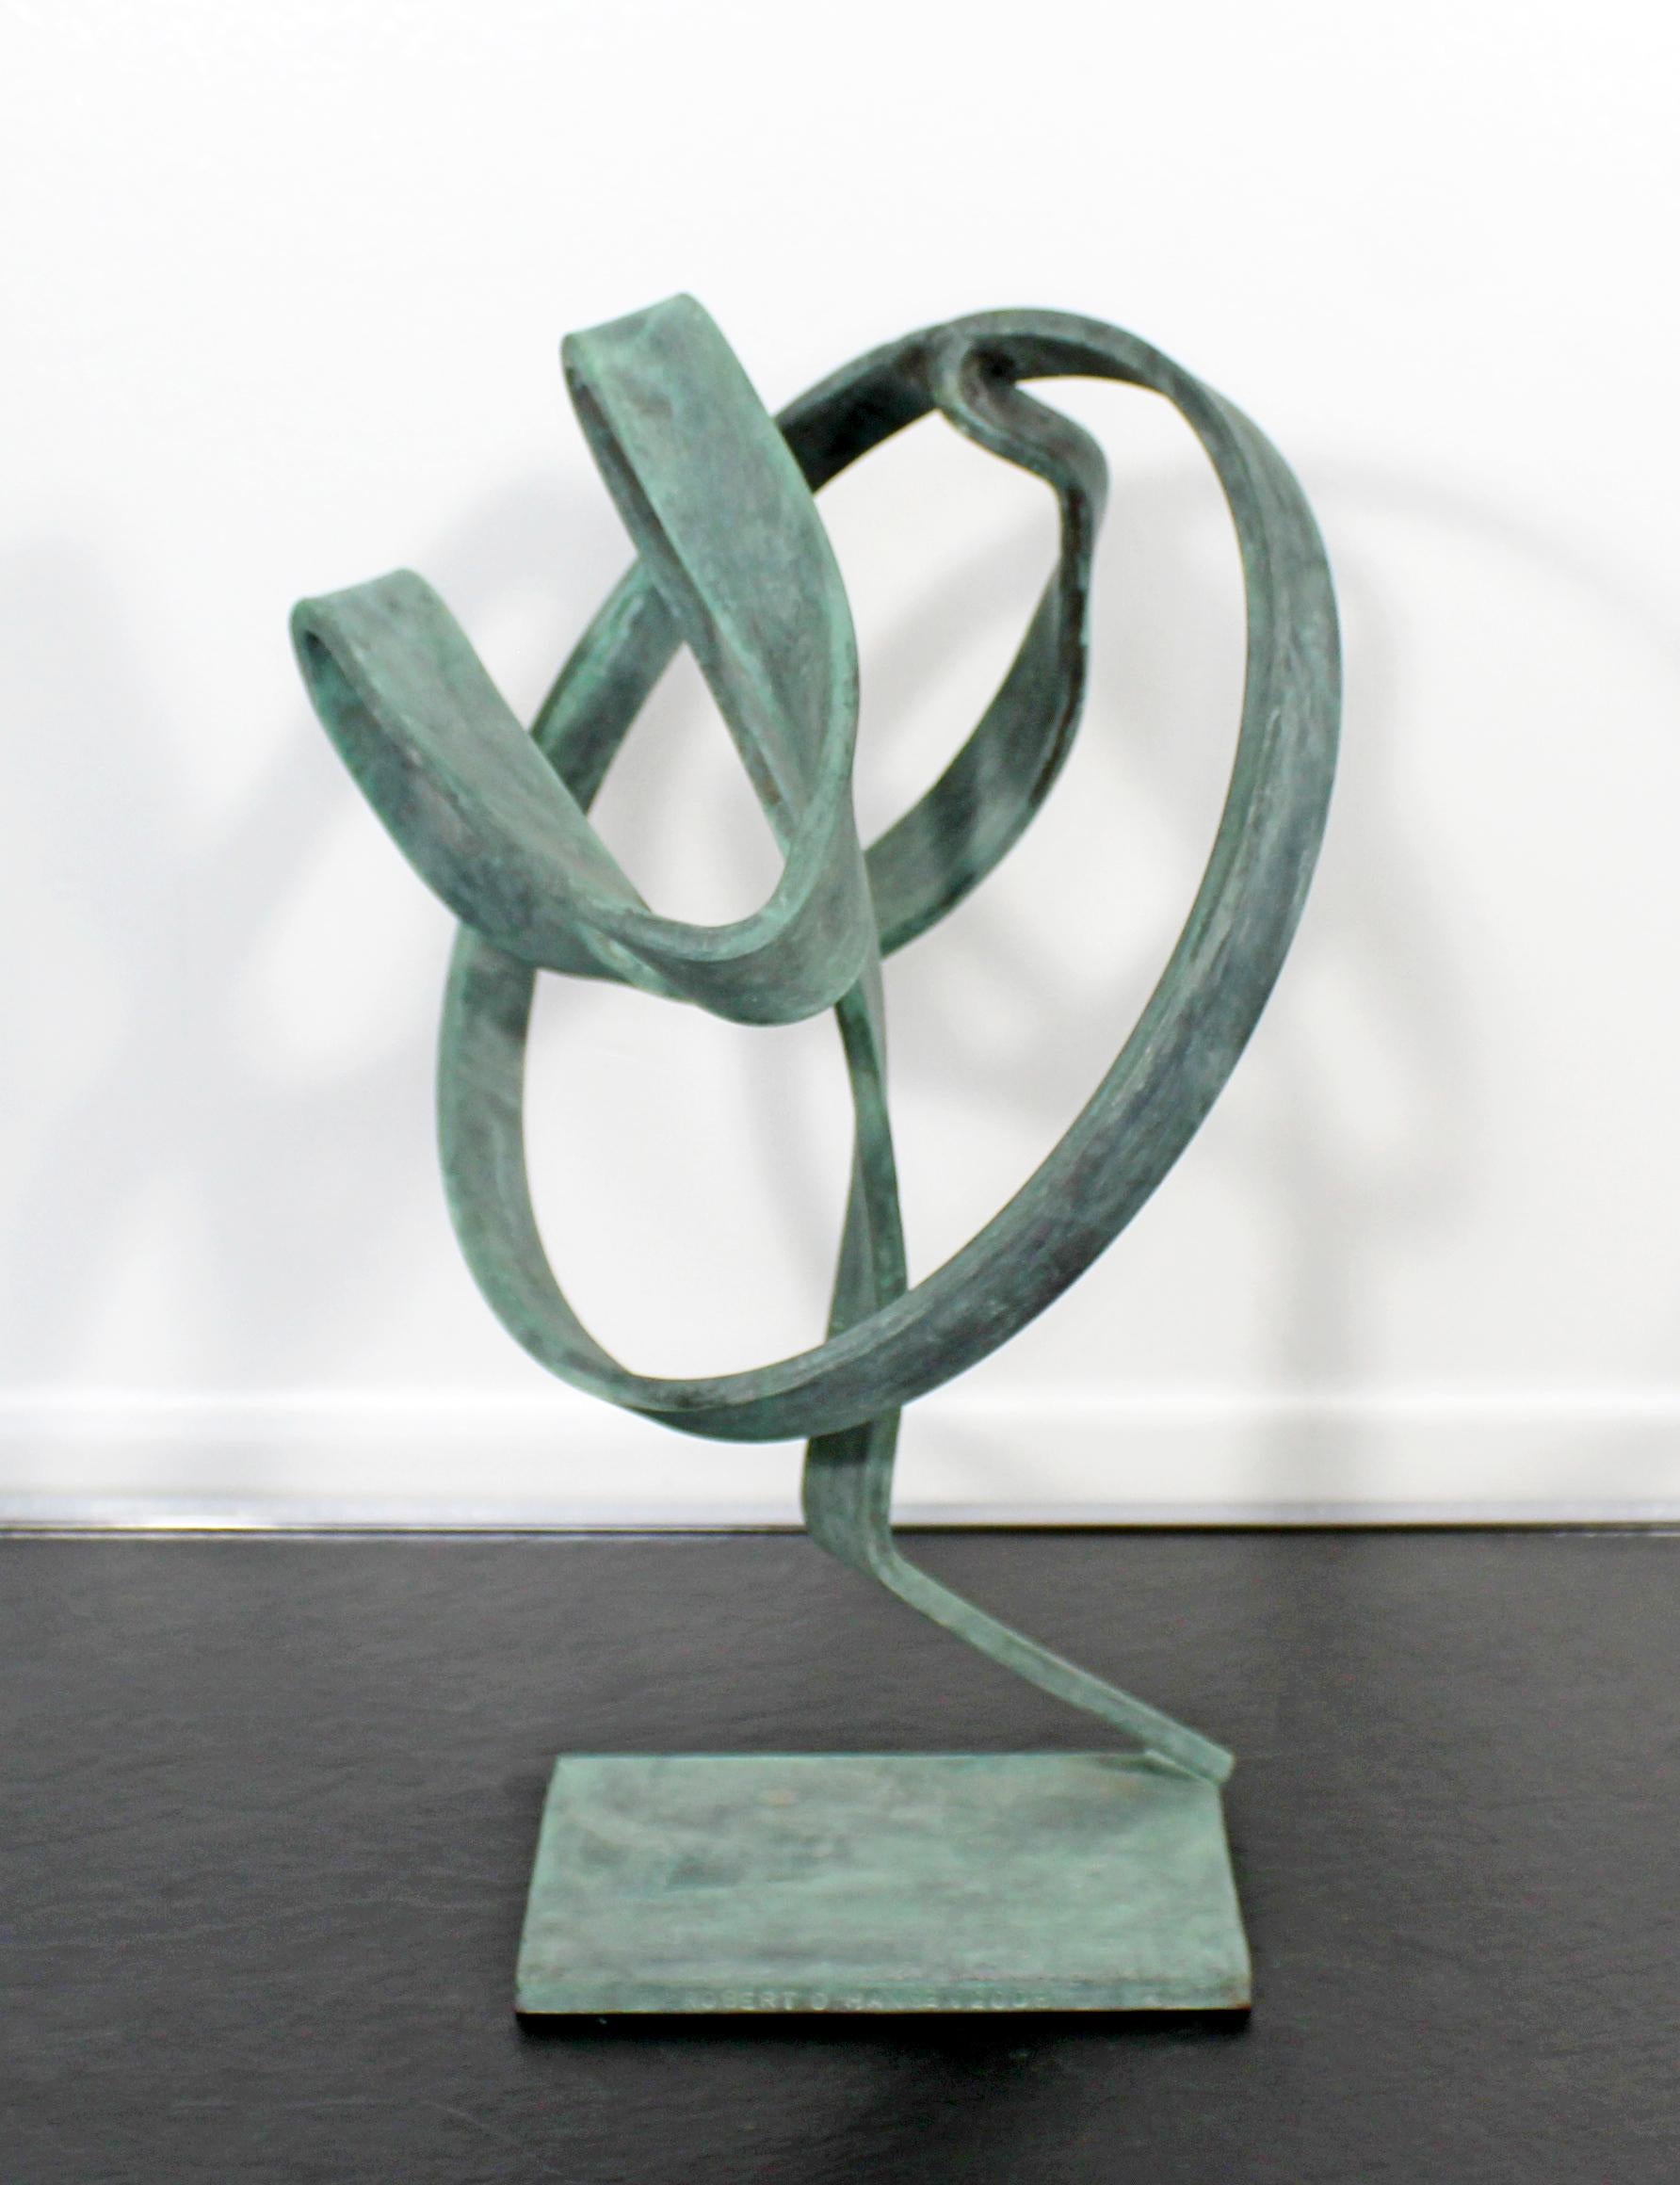 For your consideration is a gorgeous, forged painted copper metal, abstract table sculpture, signed by Robert D. Hansen, dated 2008. In excellent condition. The dimensions are 7